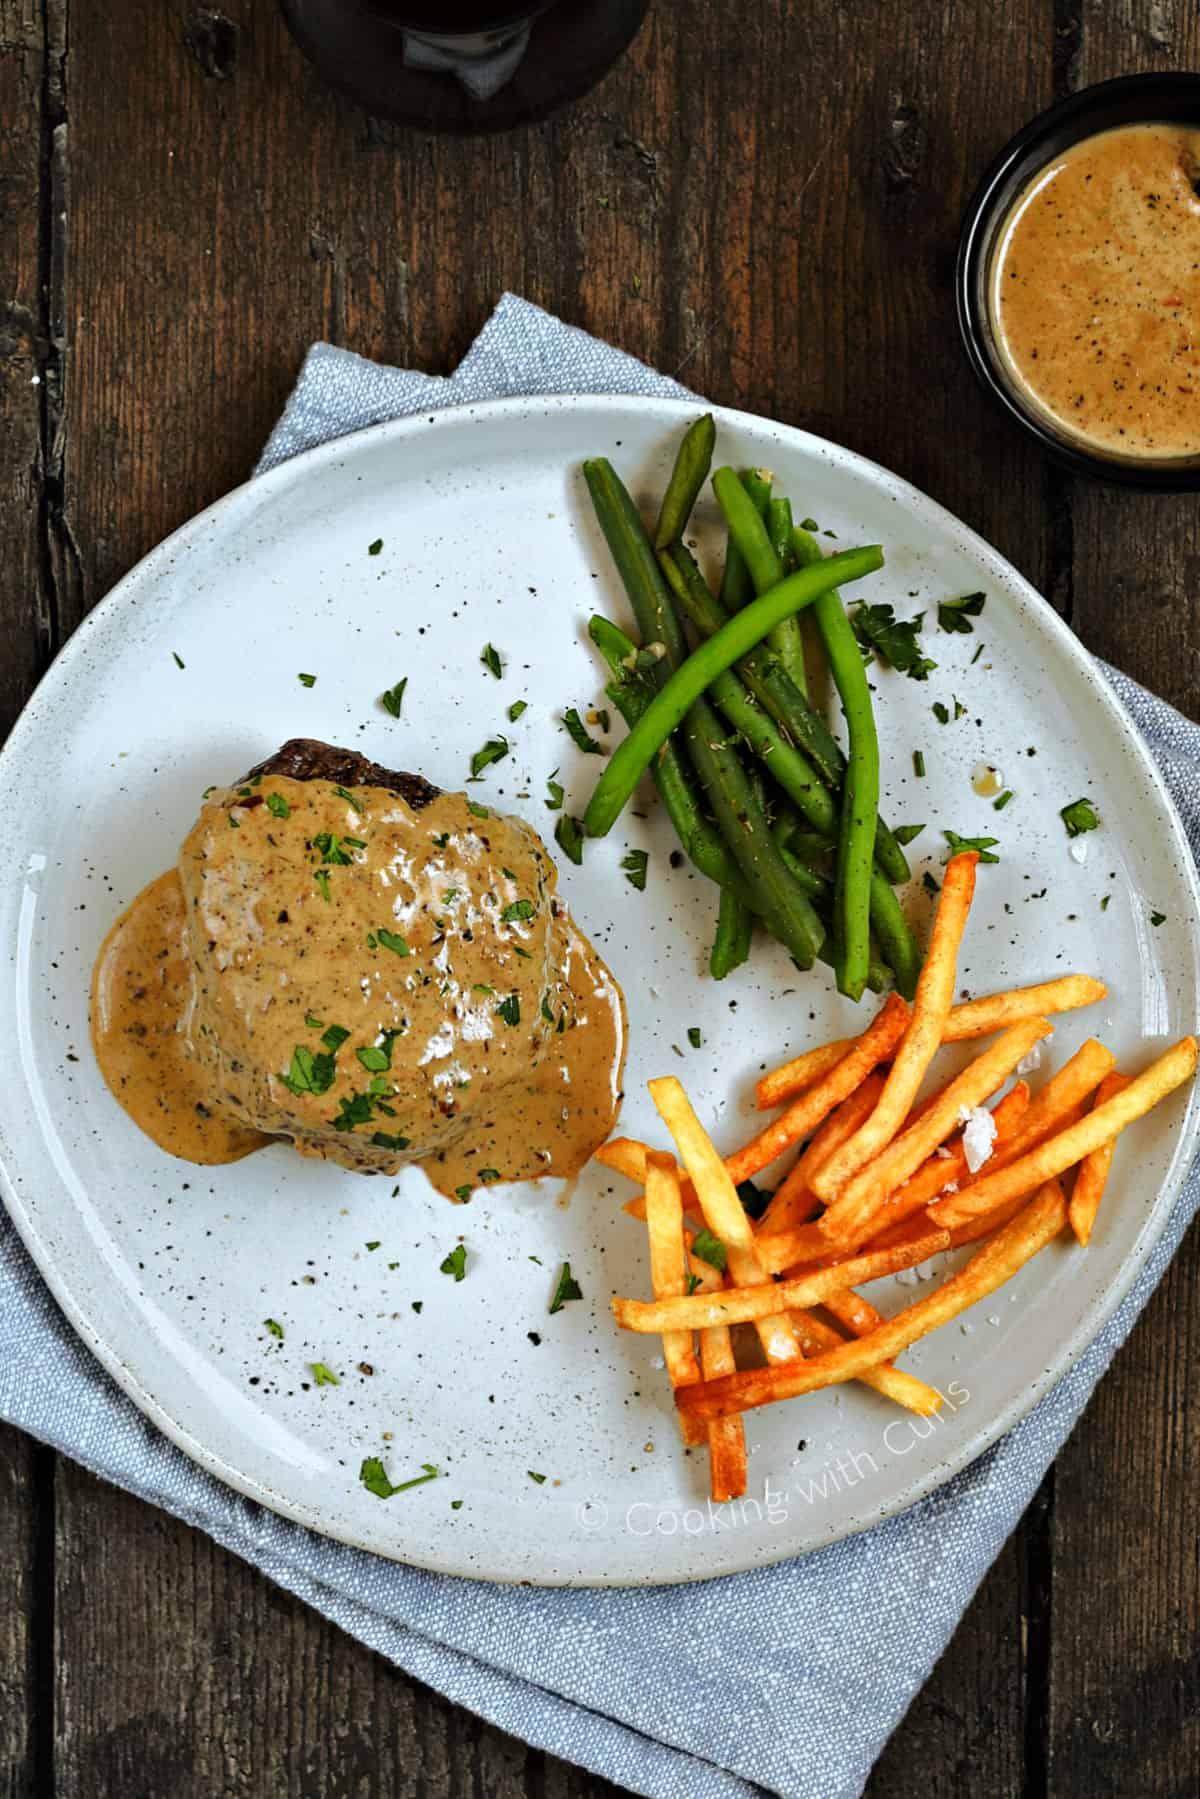 Looking down on a cream sauce covered filet mignon served on a plate with green beans and french fries.